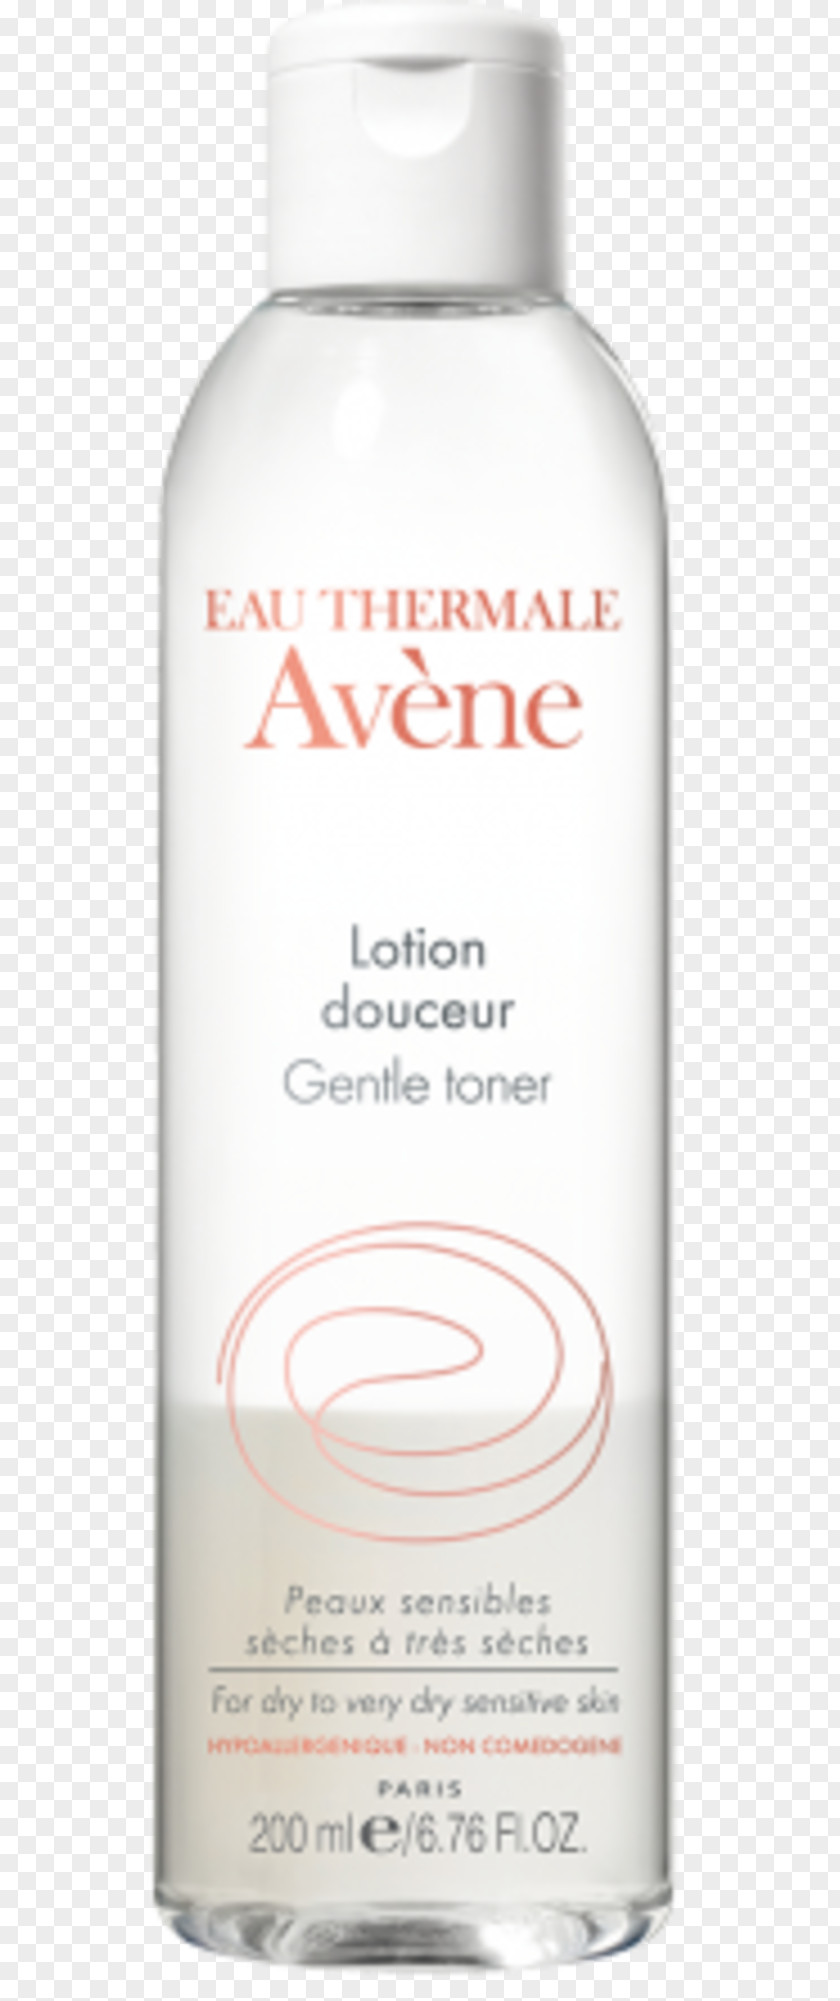 100 Percent Fresh Avène Micellar Lotion Cleanser And Make-up Remover Toner Liquid PNG